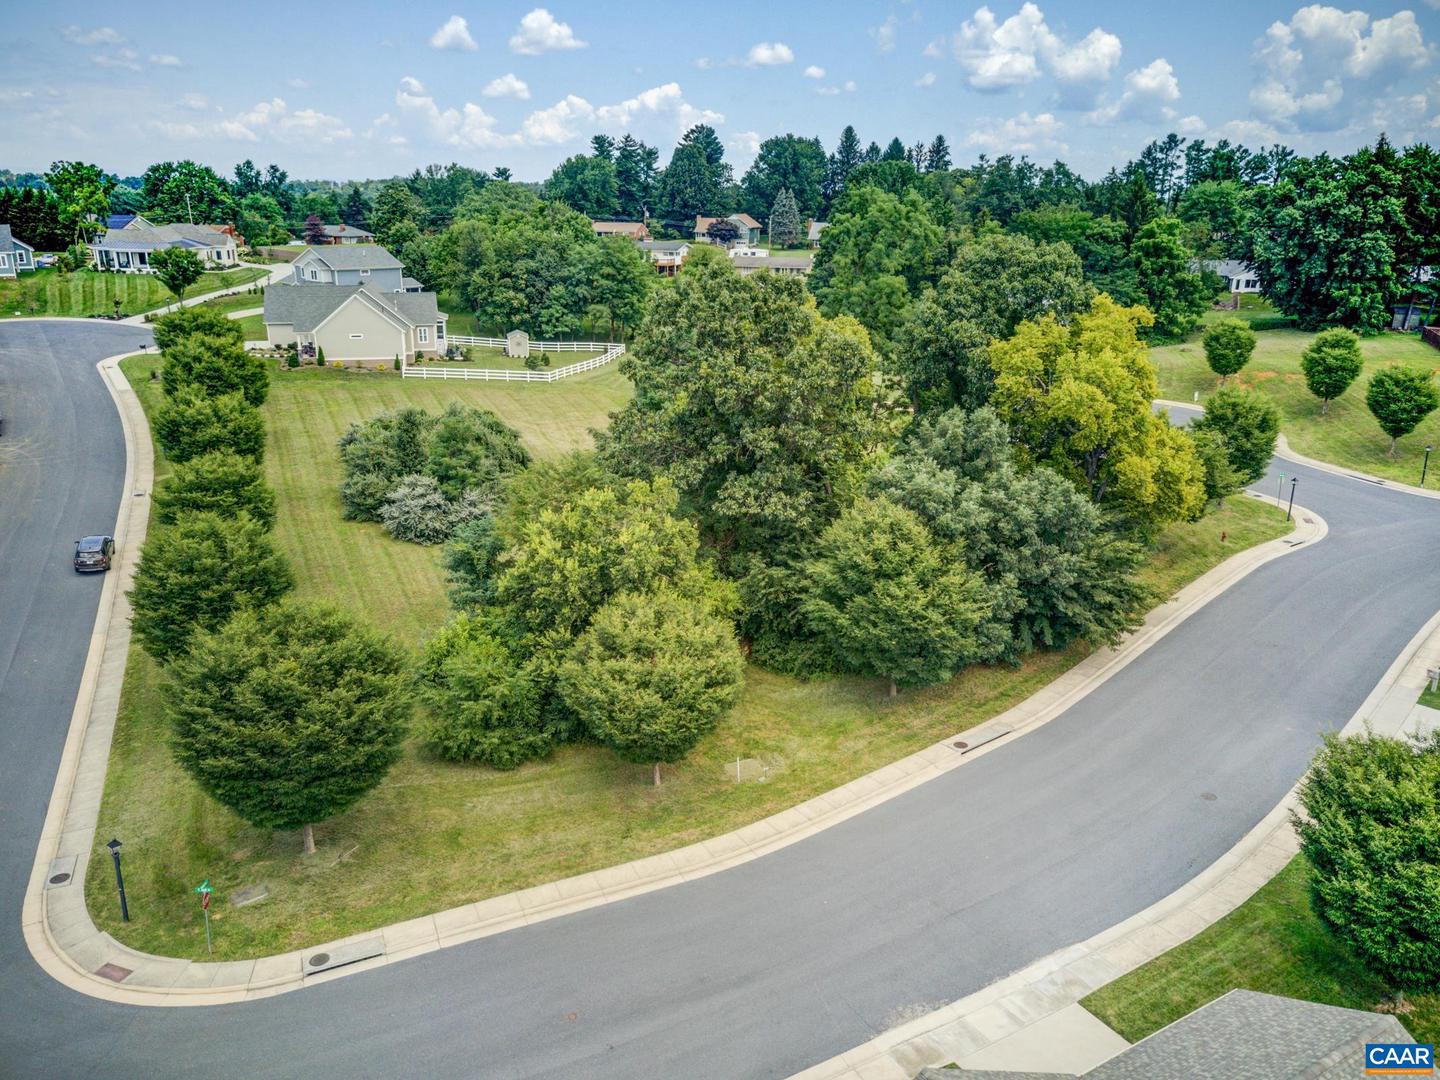 TBD FOREST AVE #17, WAYNESBORO, Virginia 22980, ,Land,For sale,TBD FOREST AVE #17,644745 MLS # 644745